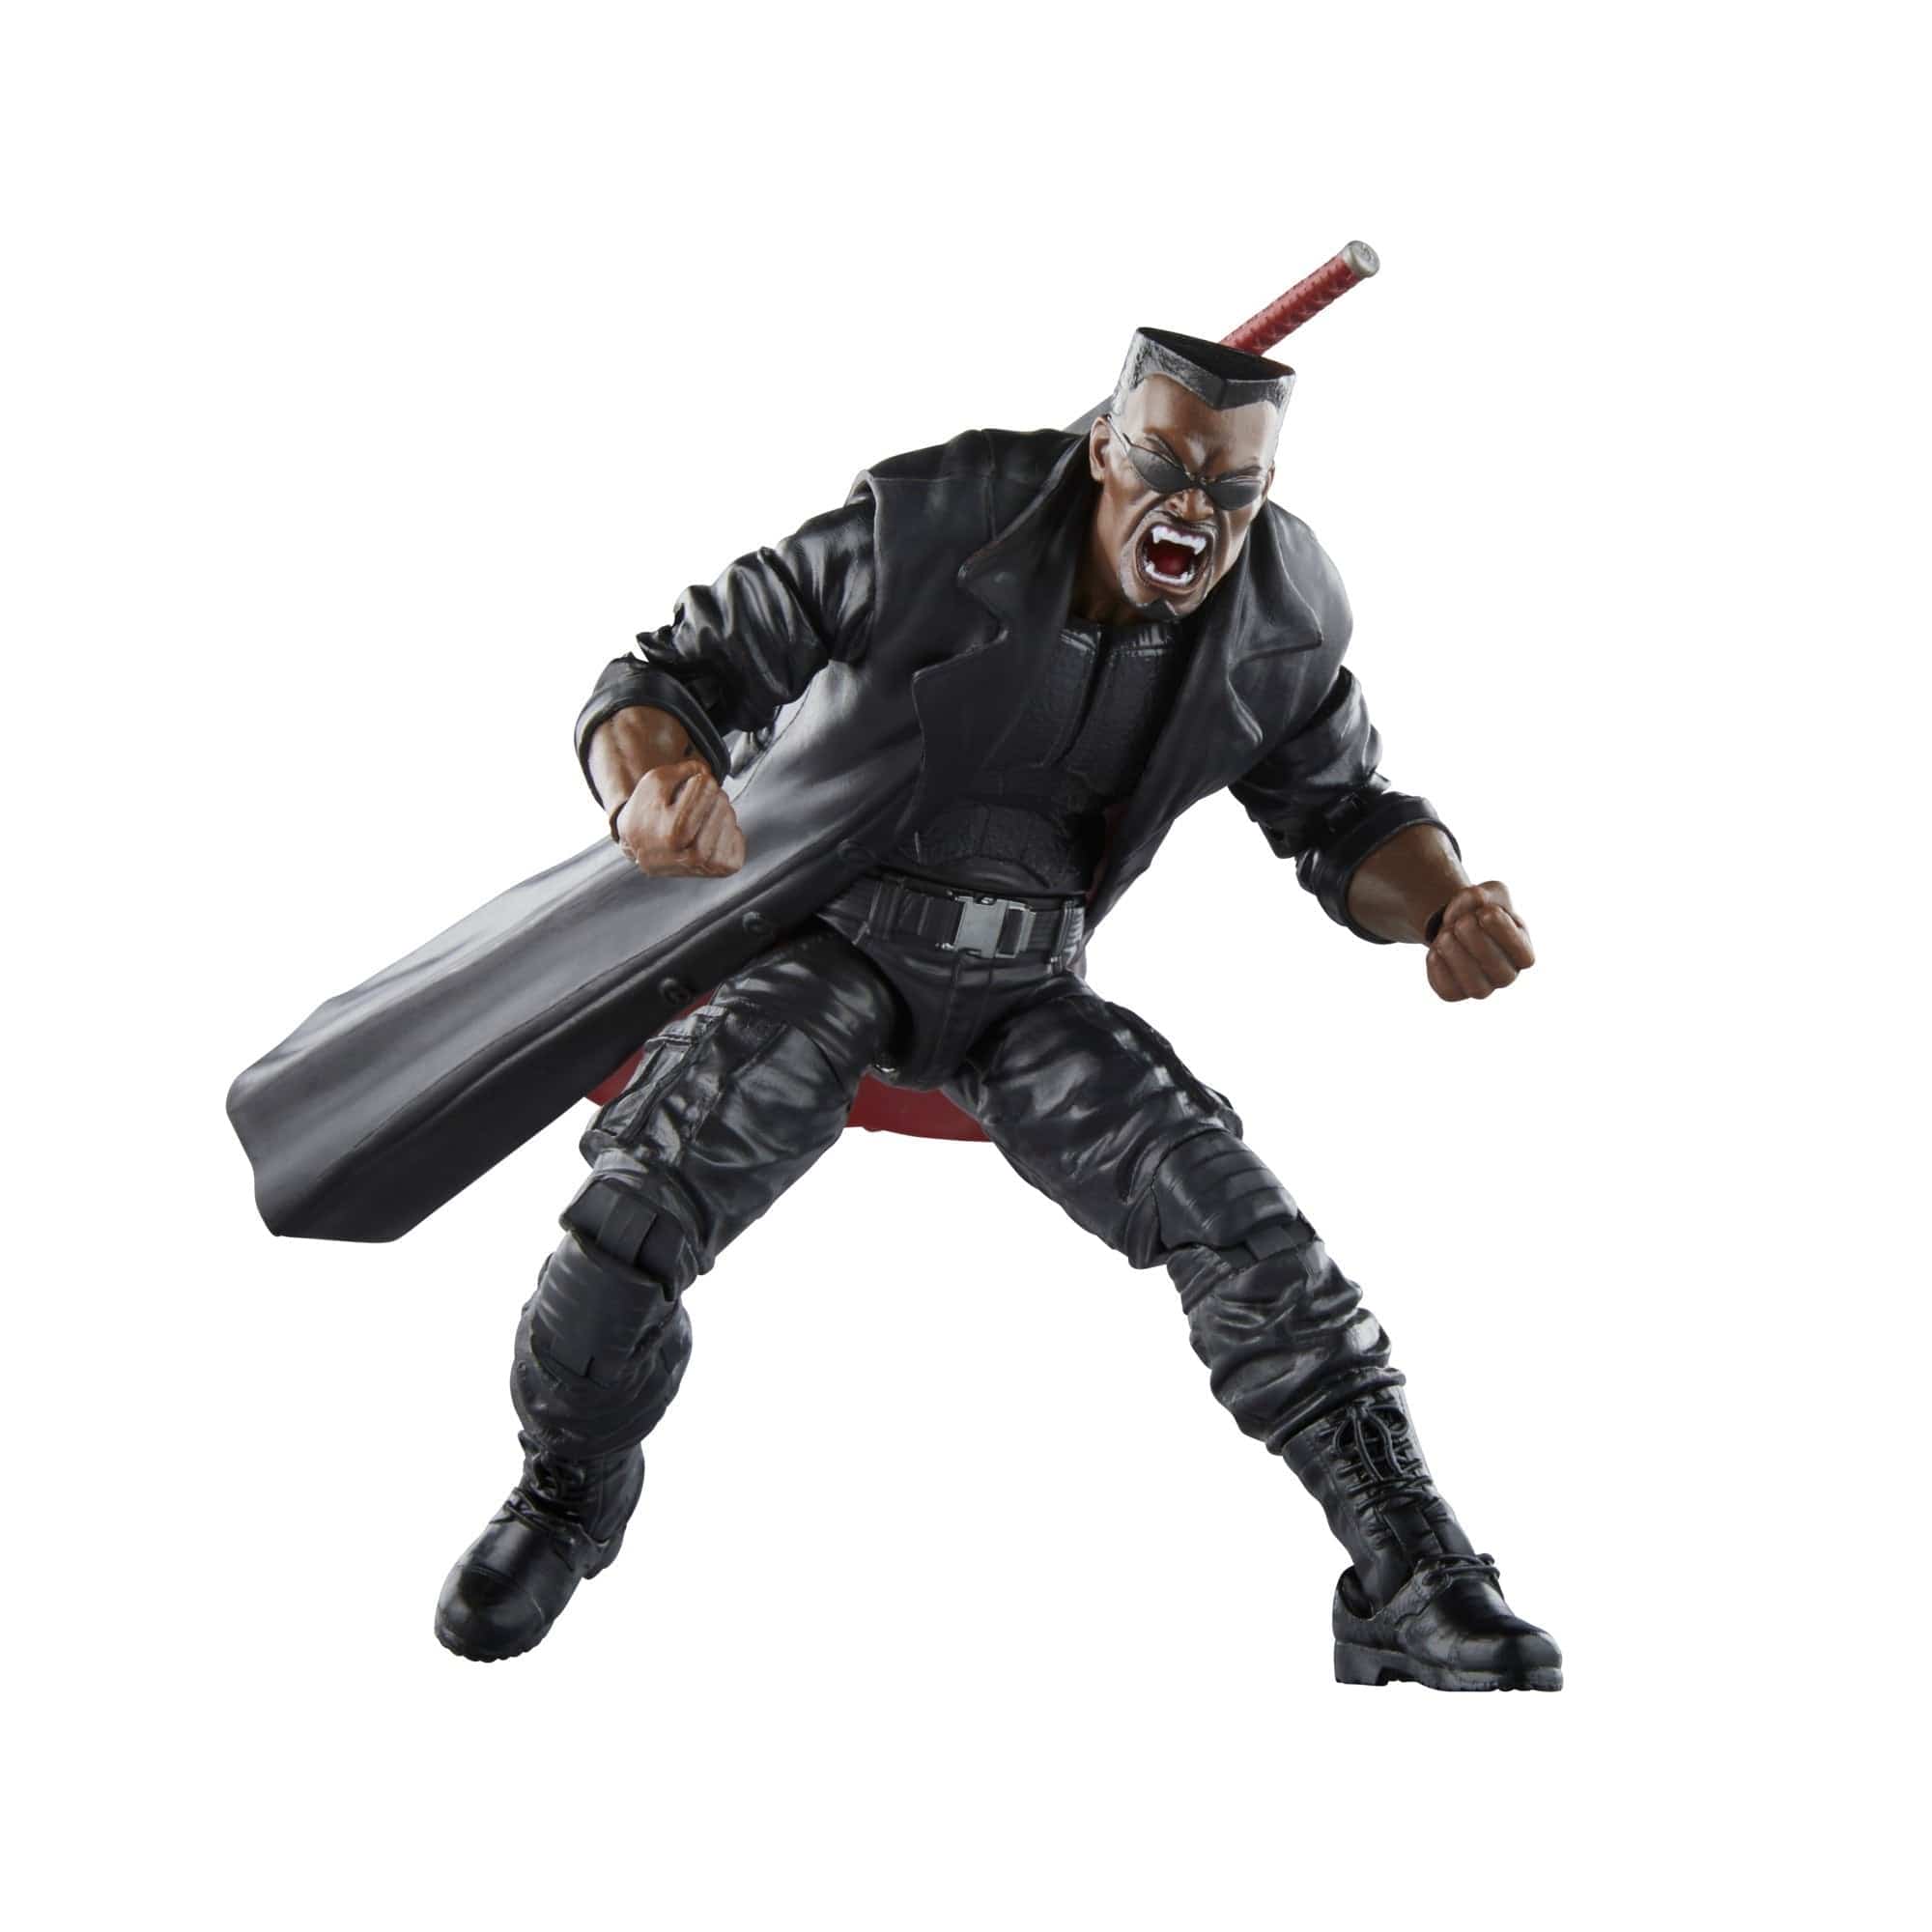 Hasbro Marvel Legends Series Marvel Knights Blade Action Figure (Mindless One Build-A-Figure)